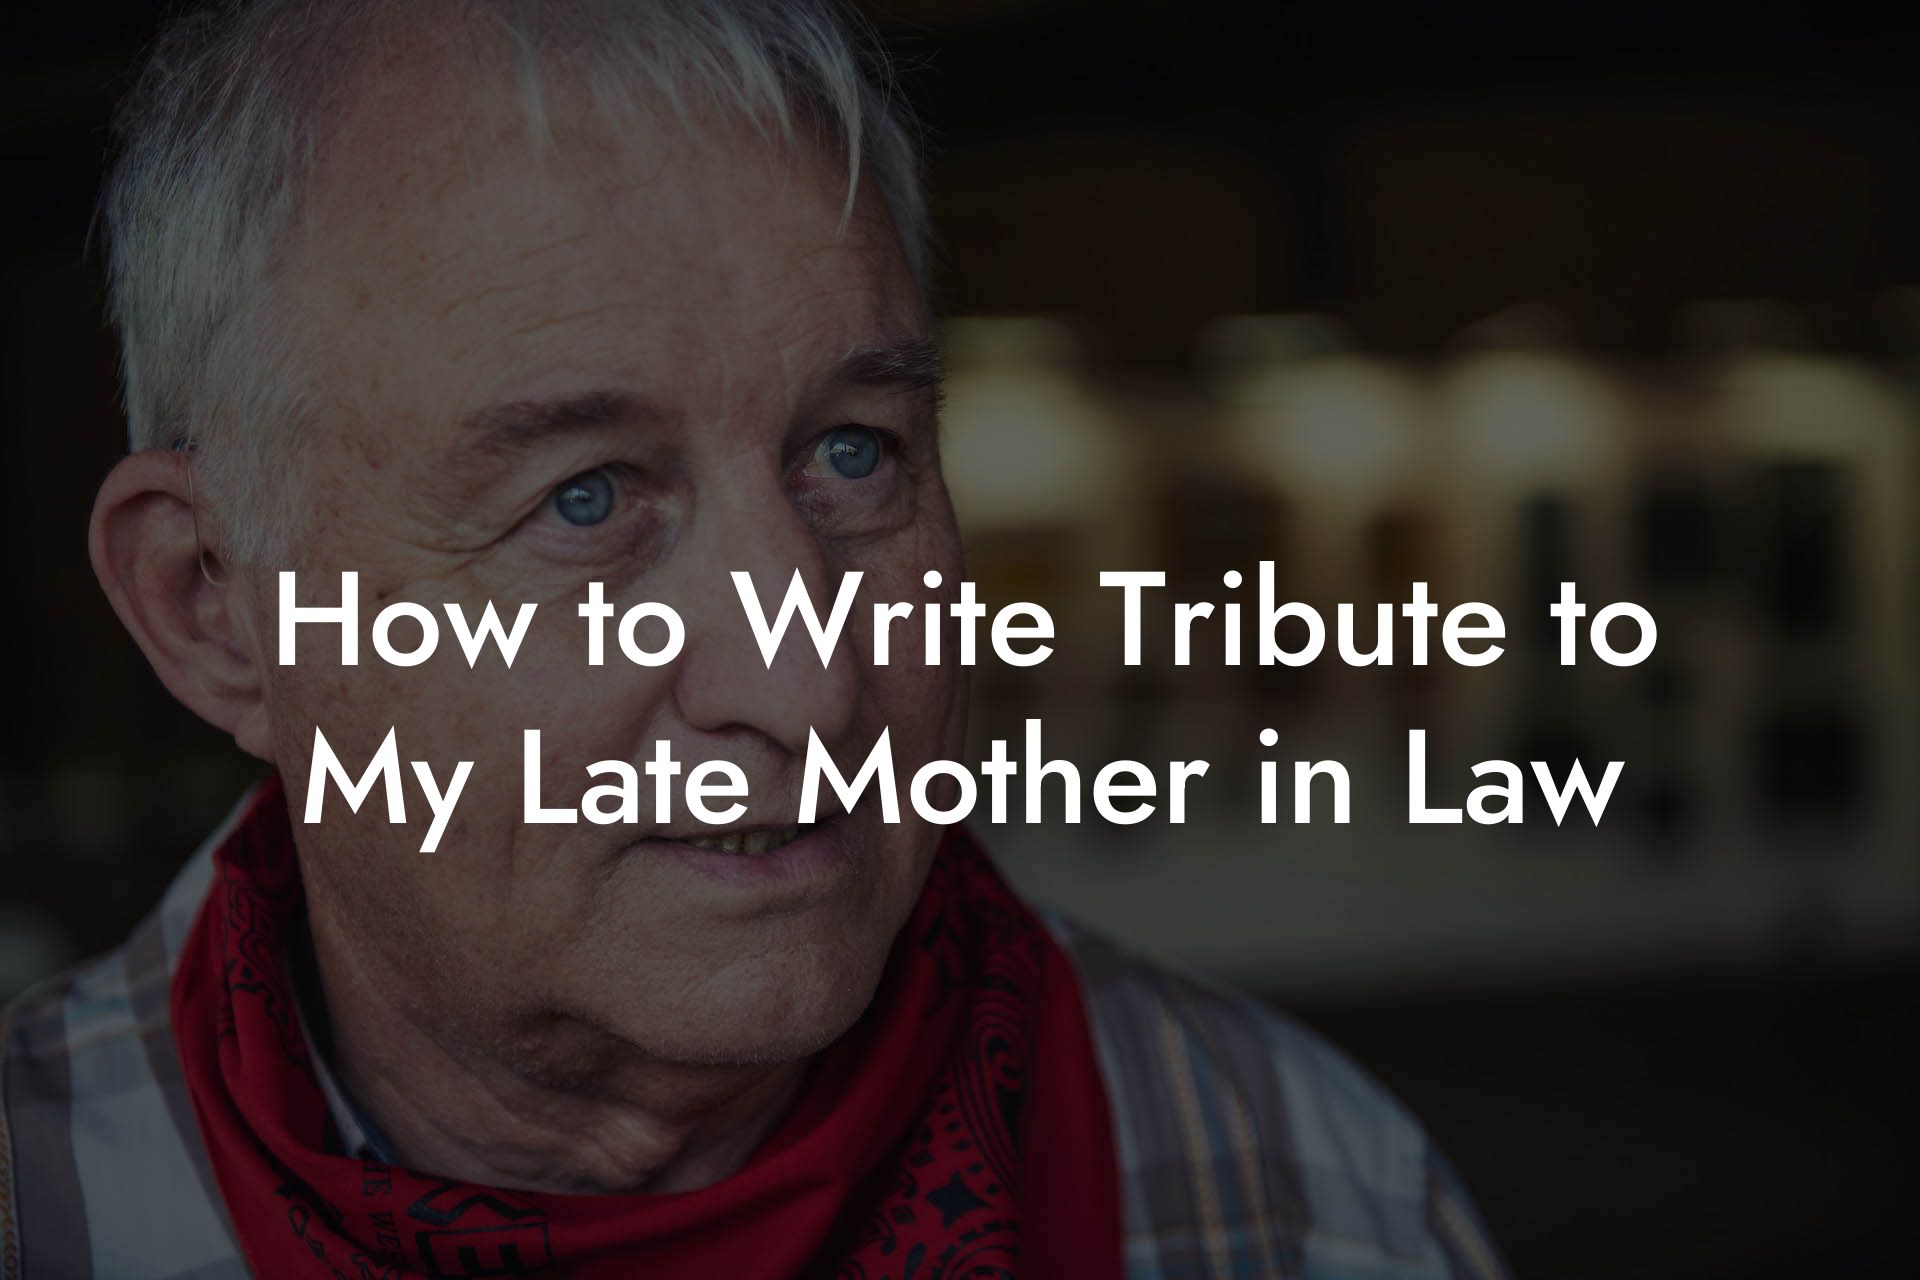 How to Write Tribute to My Late Mother in Law